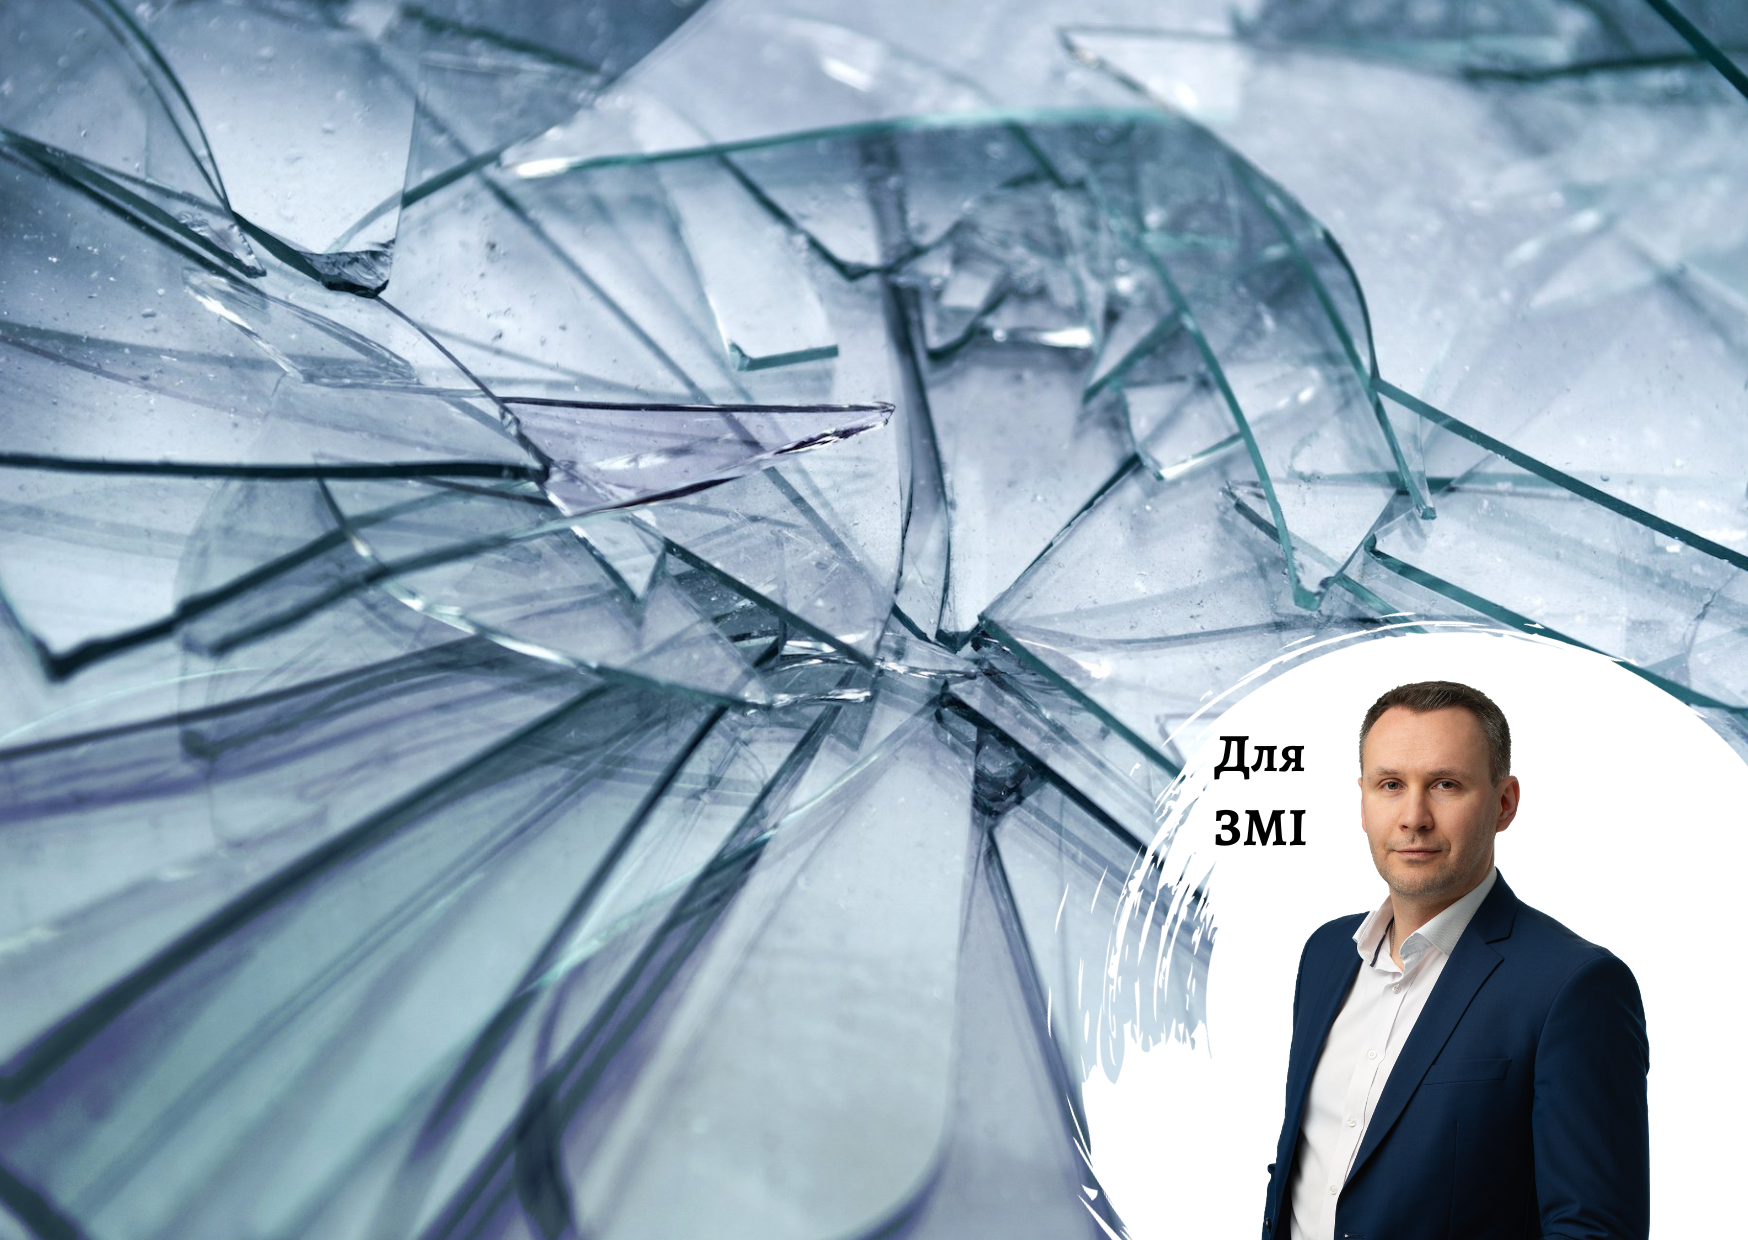 A shortage of glass is expected in Ukraine in October - comments on the market from the general director of Pro-Consulting Oleksandr Sokolov. FORBES